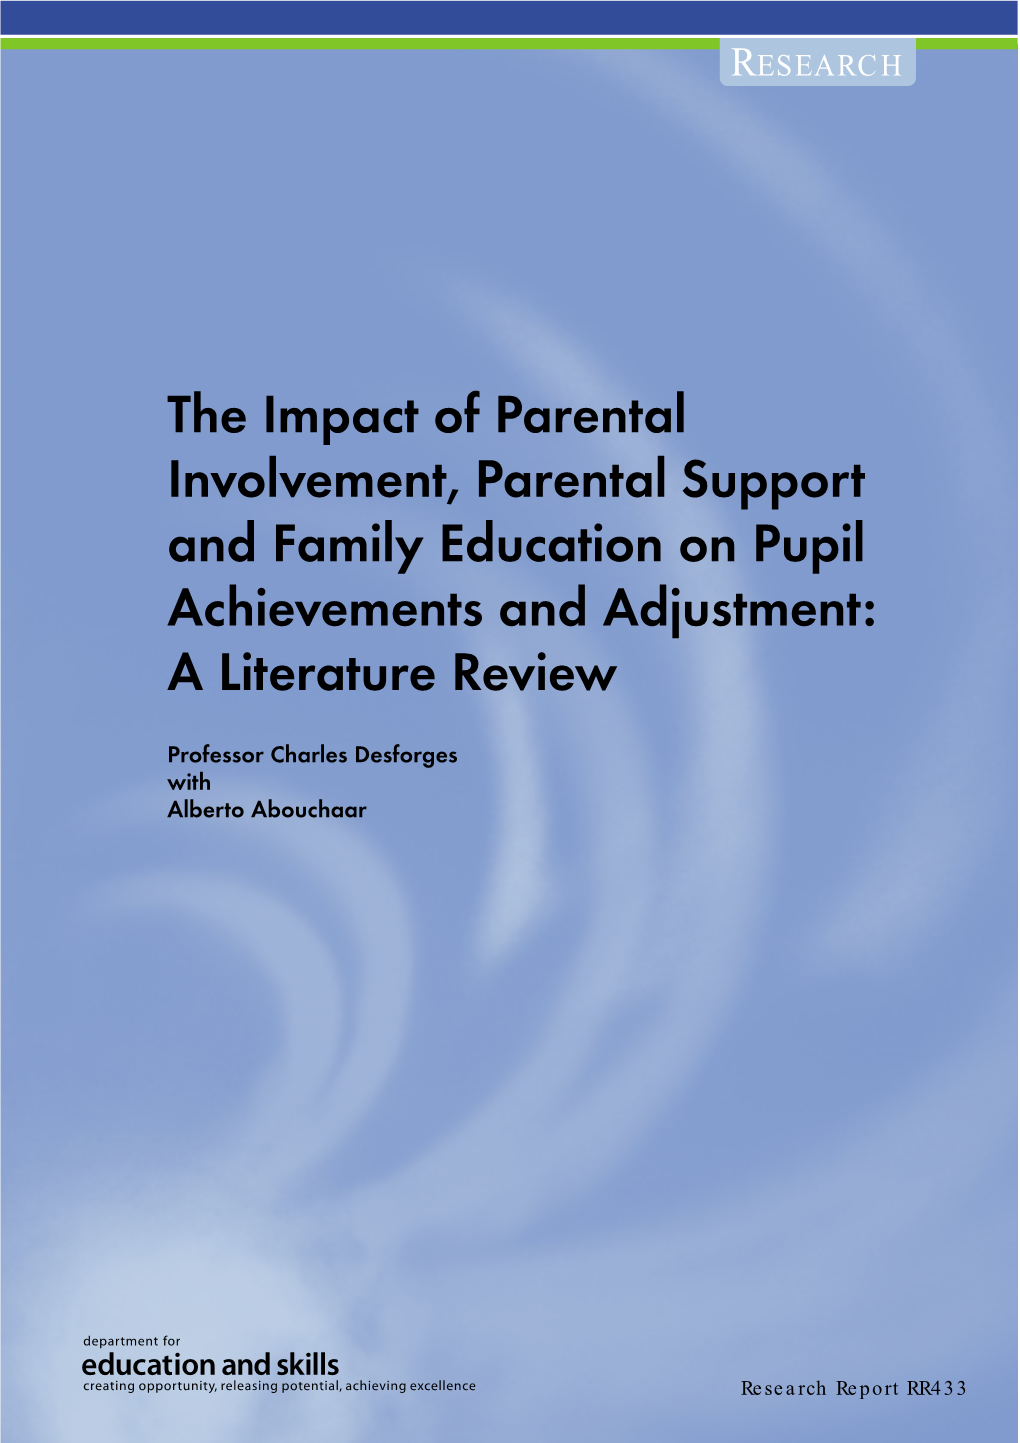 The Impact of Parental Involvement, Parental Support and Family Education on Pupil Achievements and Adjustment: a Literature Review